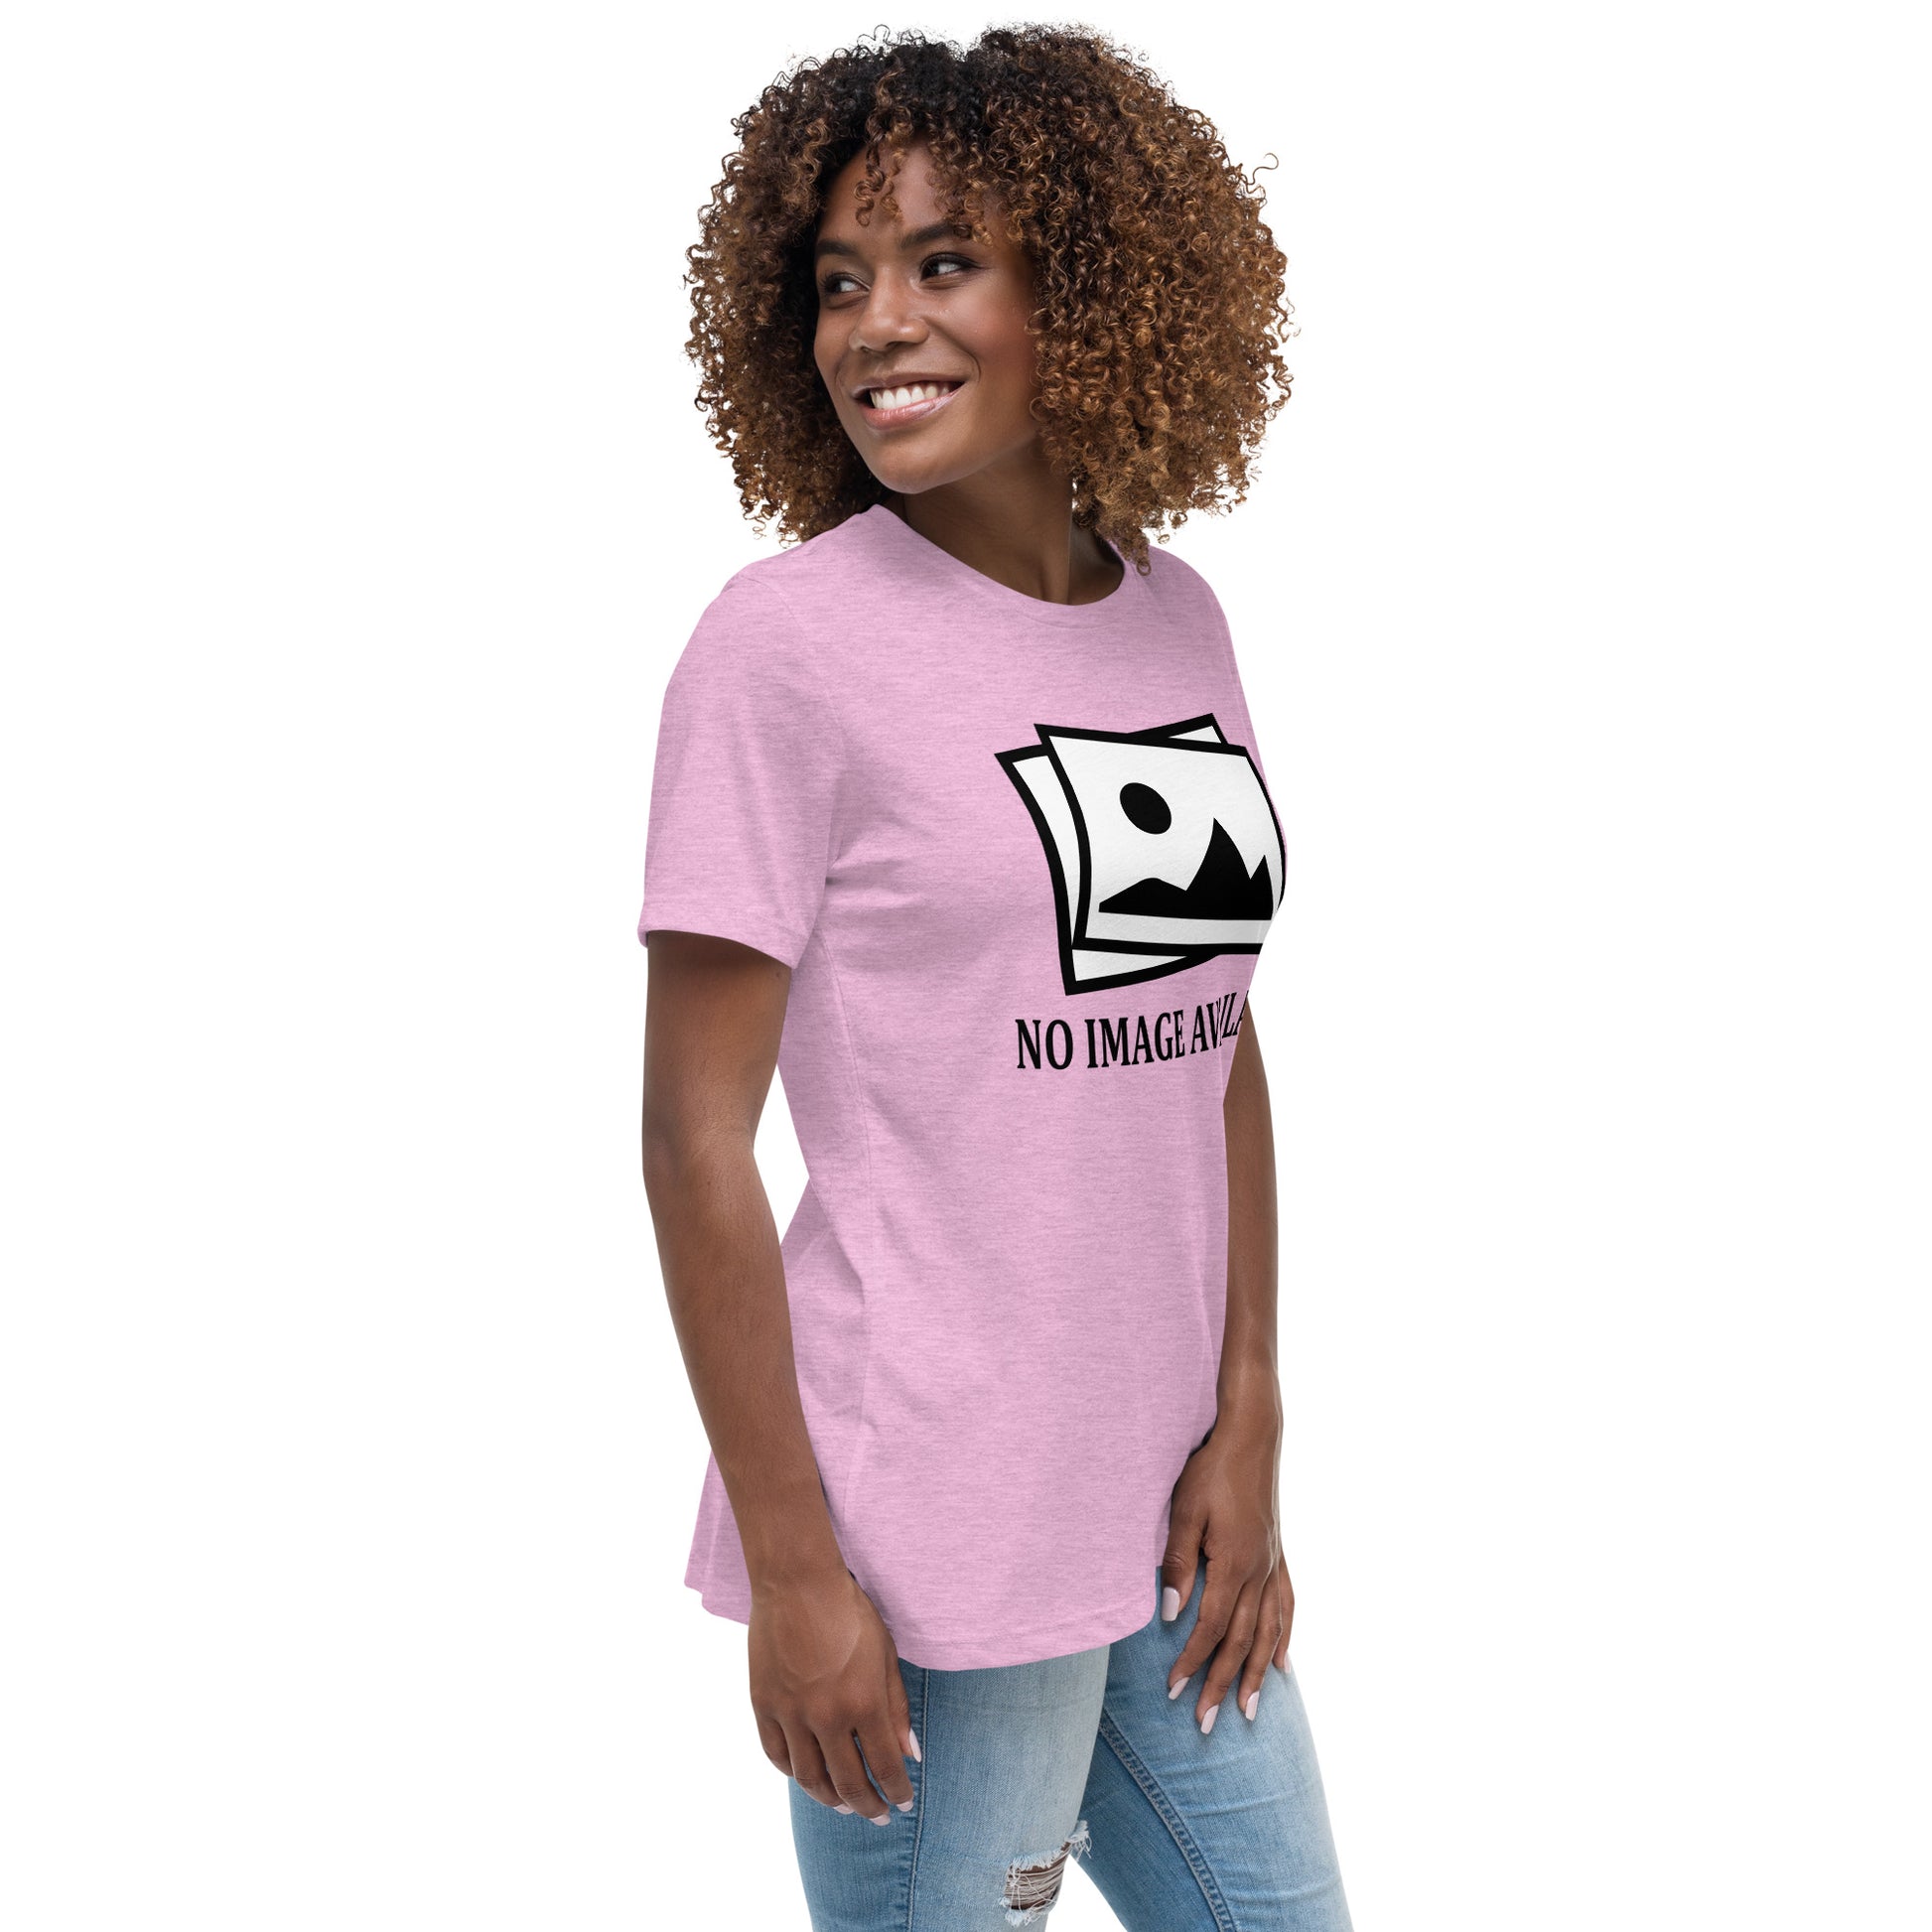 Women with lilac t-shirt with image and text "no image available"